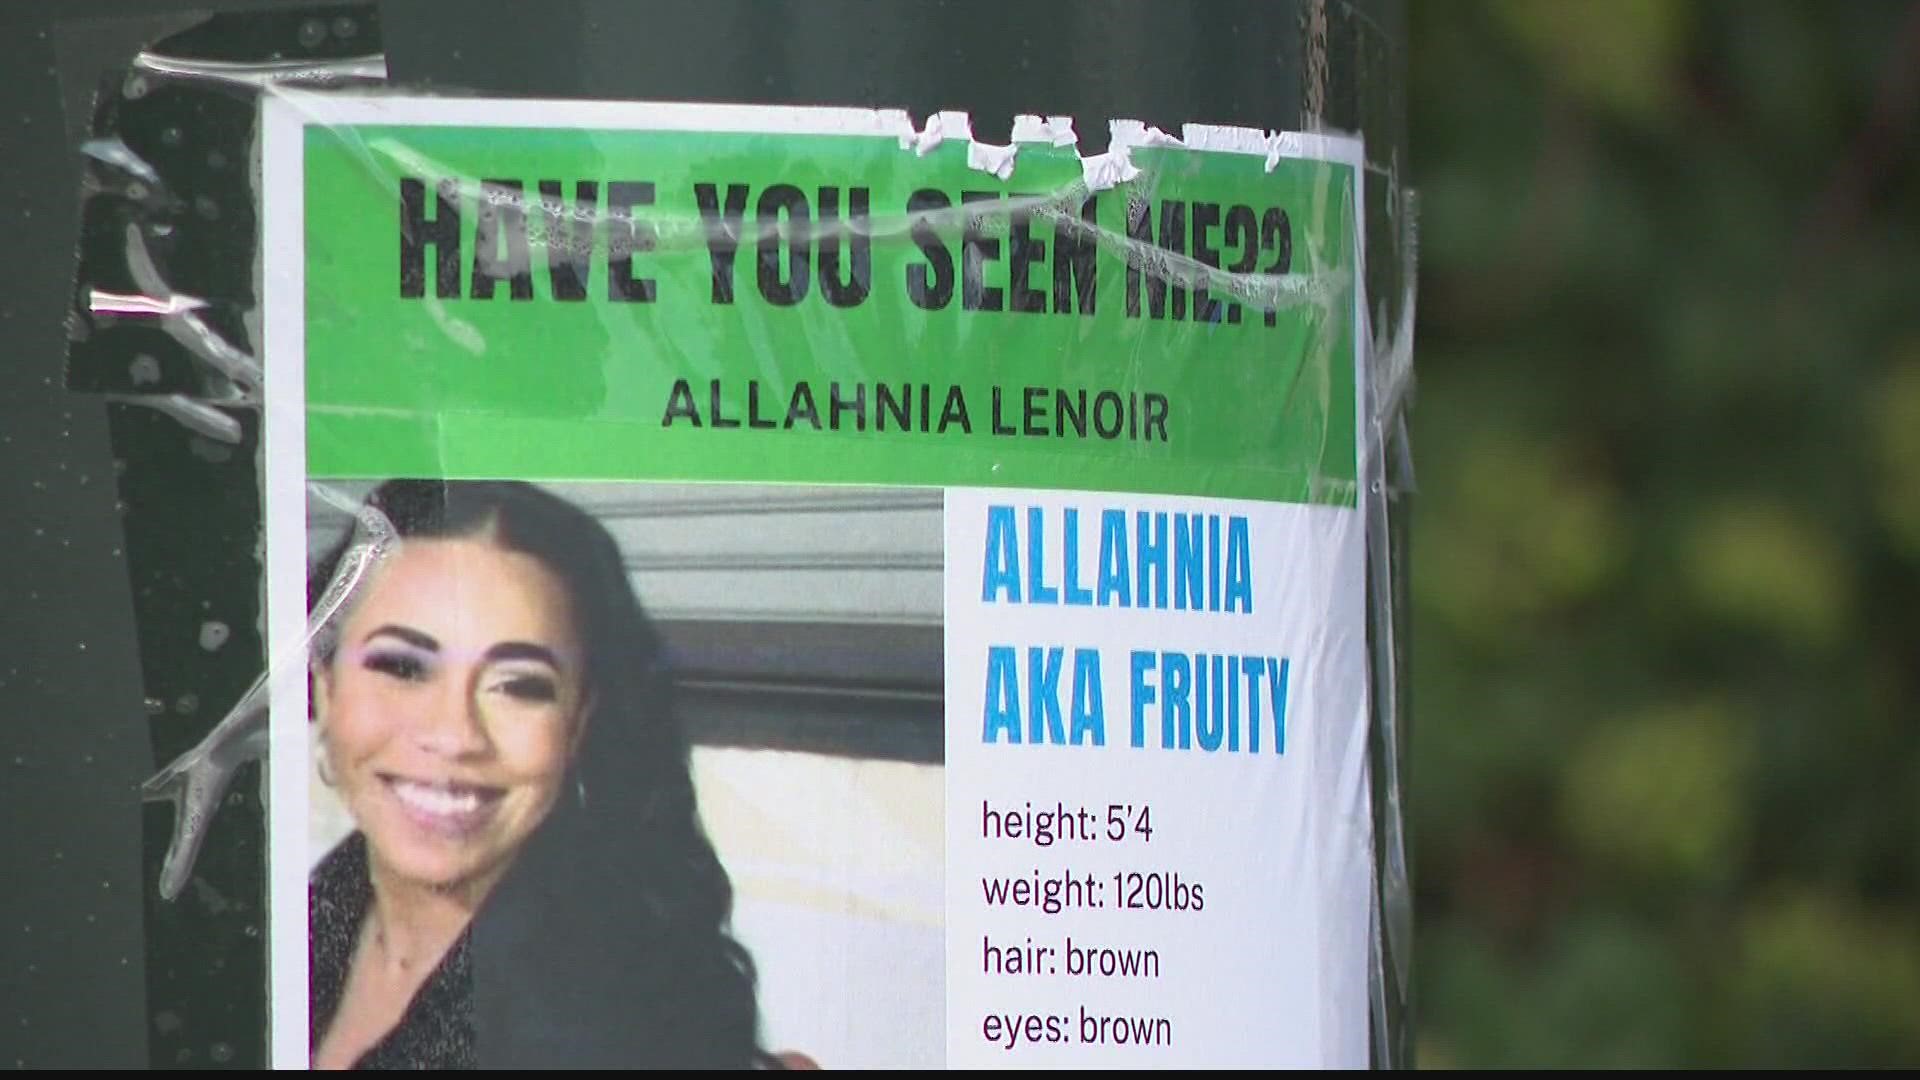 For 21 days, Jannette Jackson has searched for her 24-year-old daughter, Allahnia Lenoir. She was last seen walking into an apartment complex along Peachtree Street.